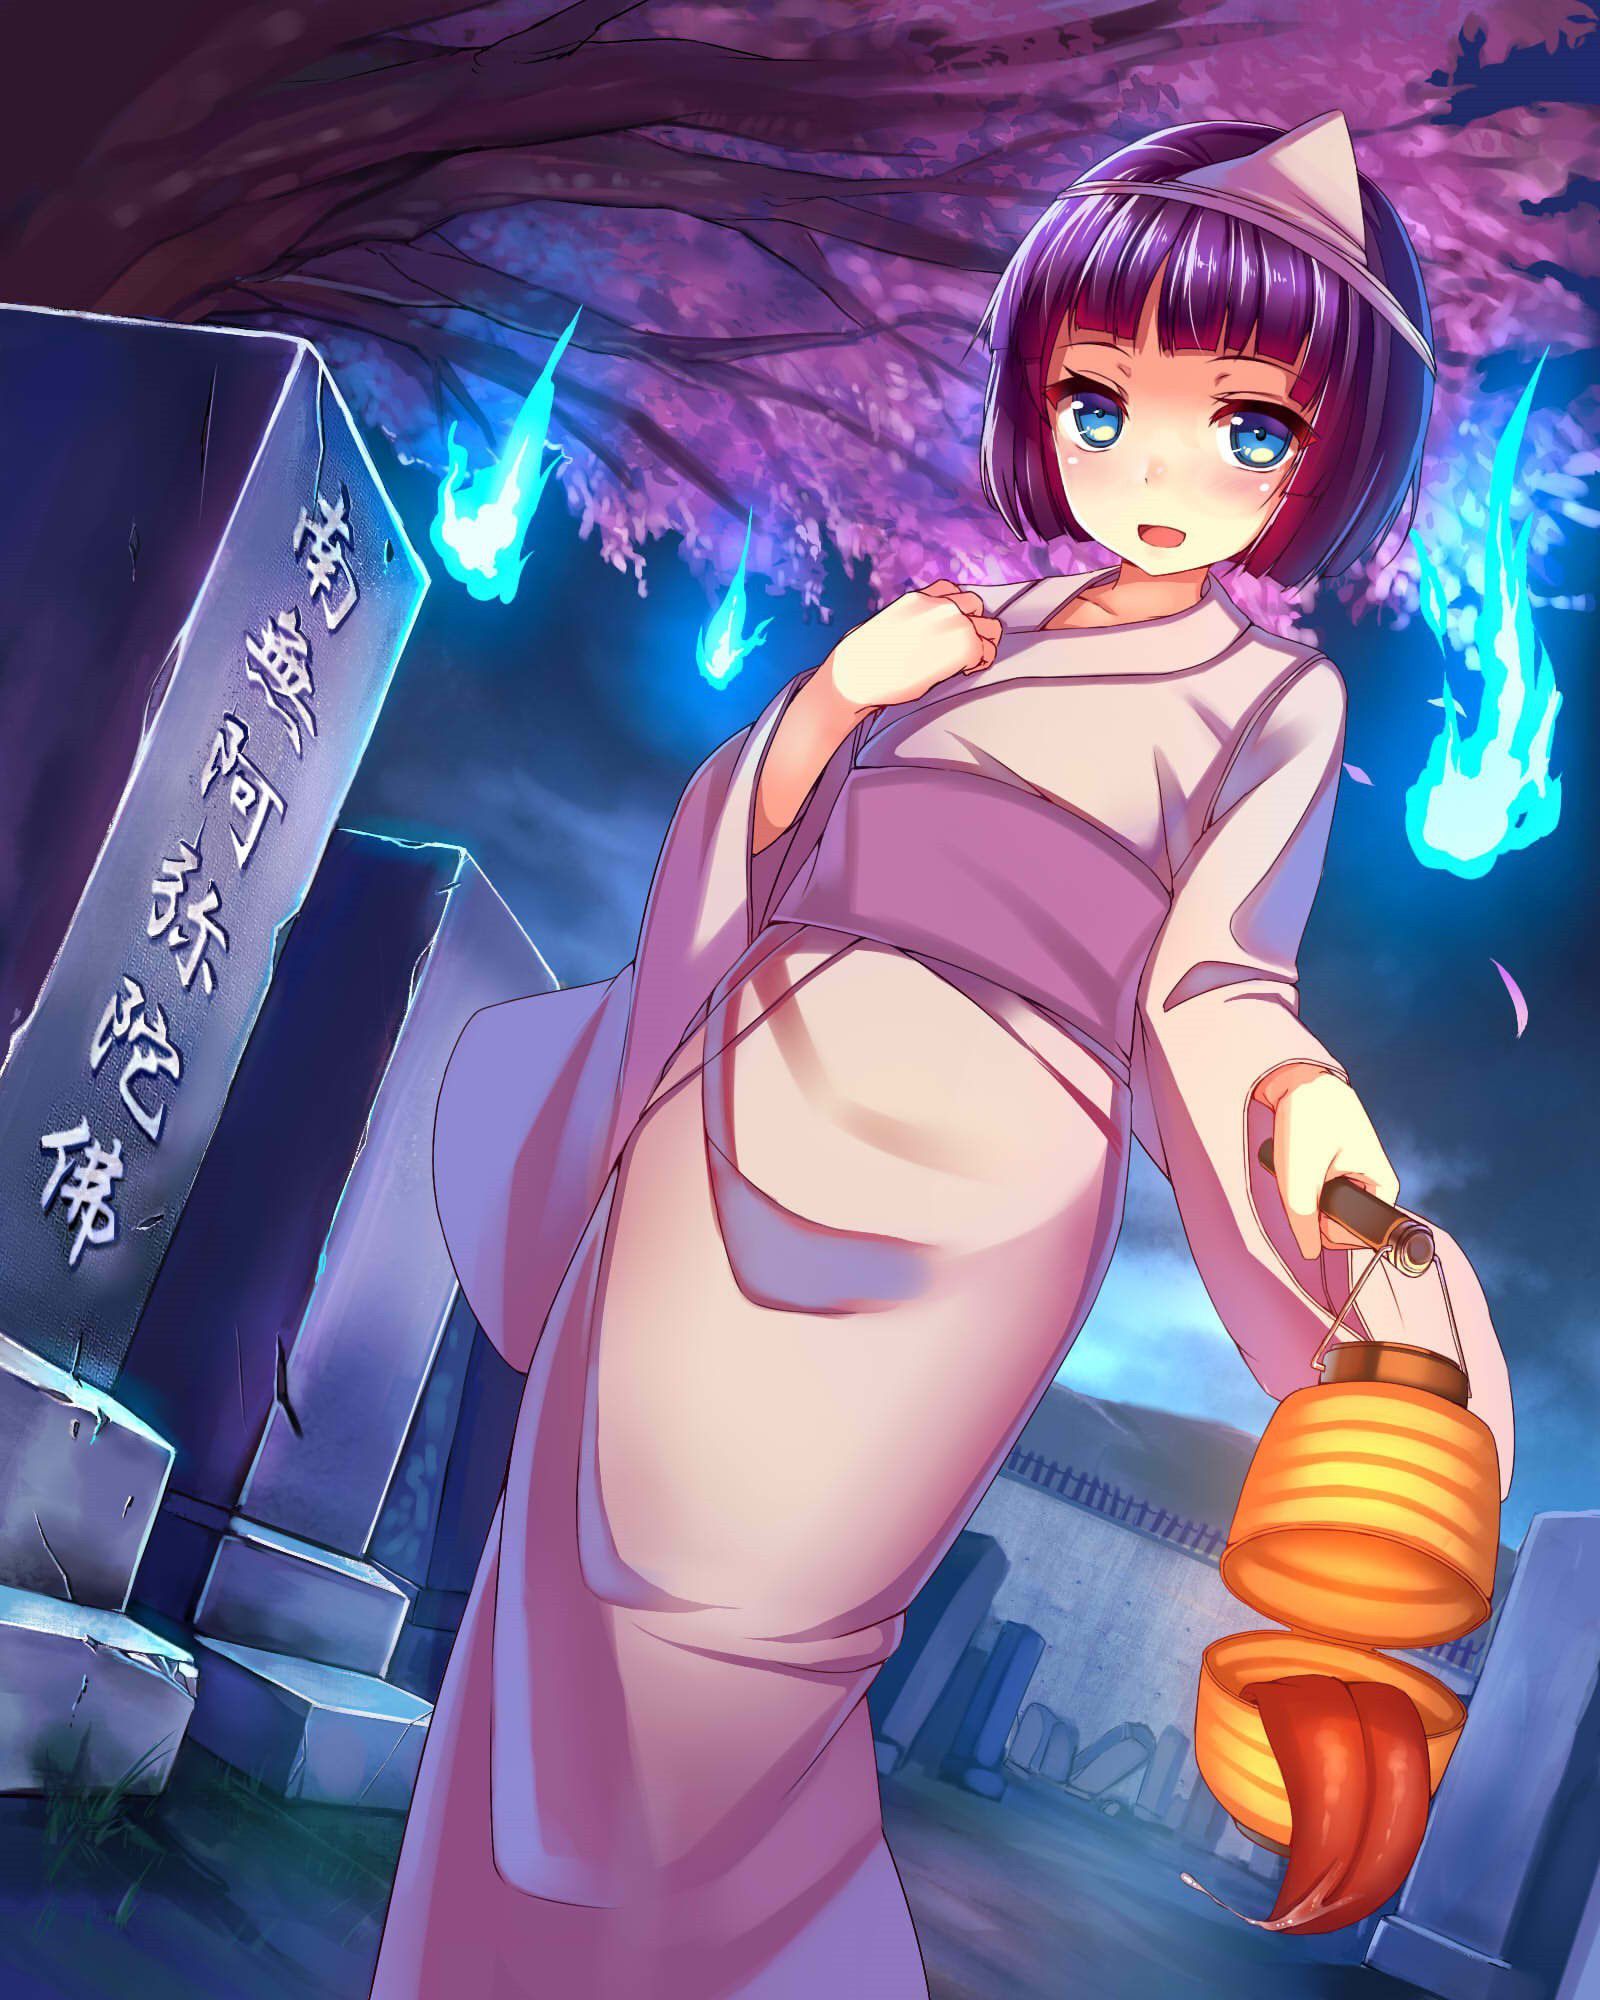 [the second] Monster daughter eroticism image [demon daughter] 6 27